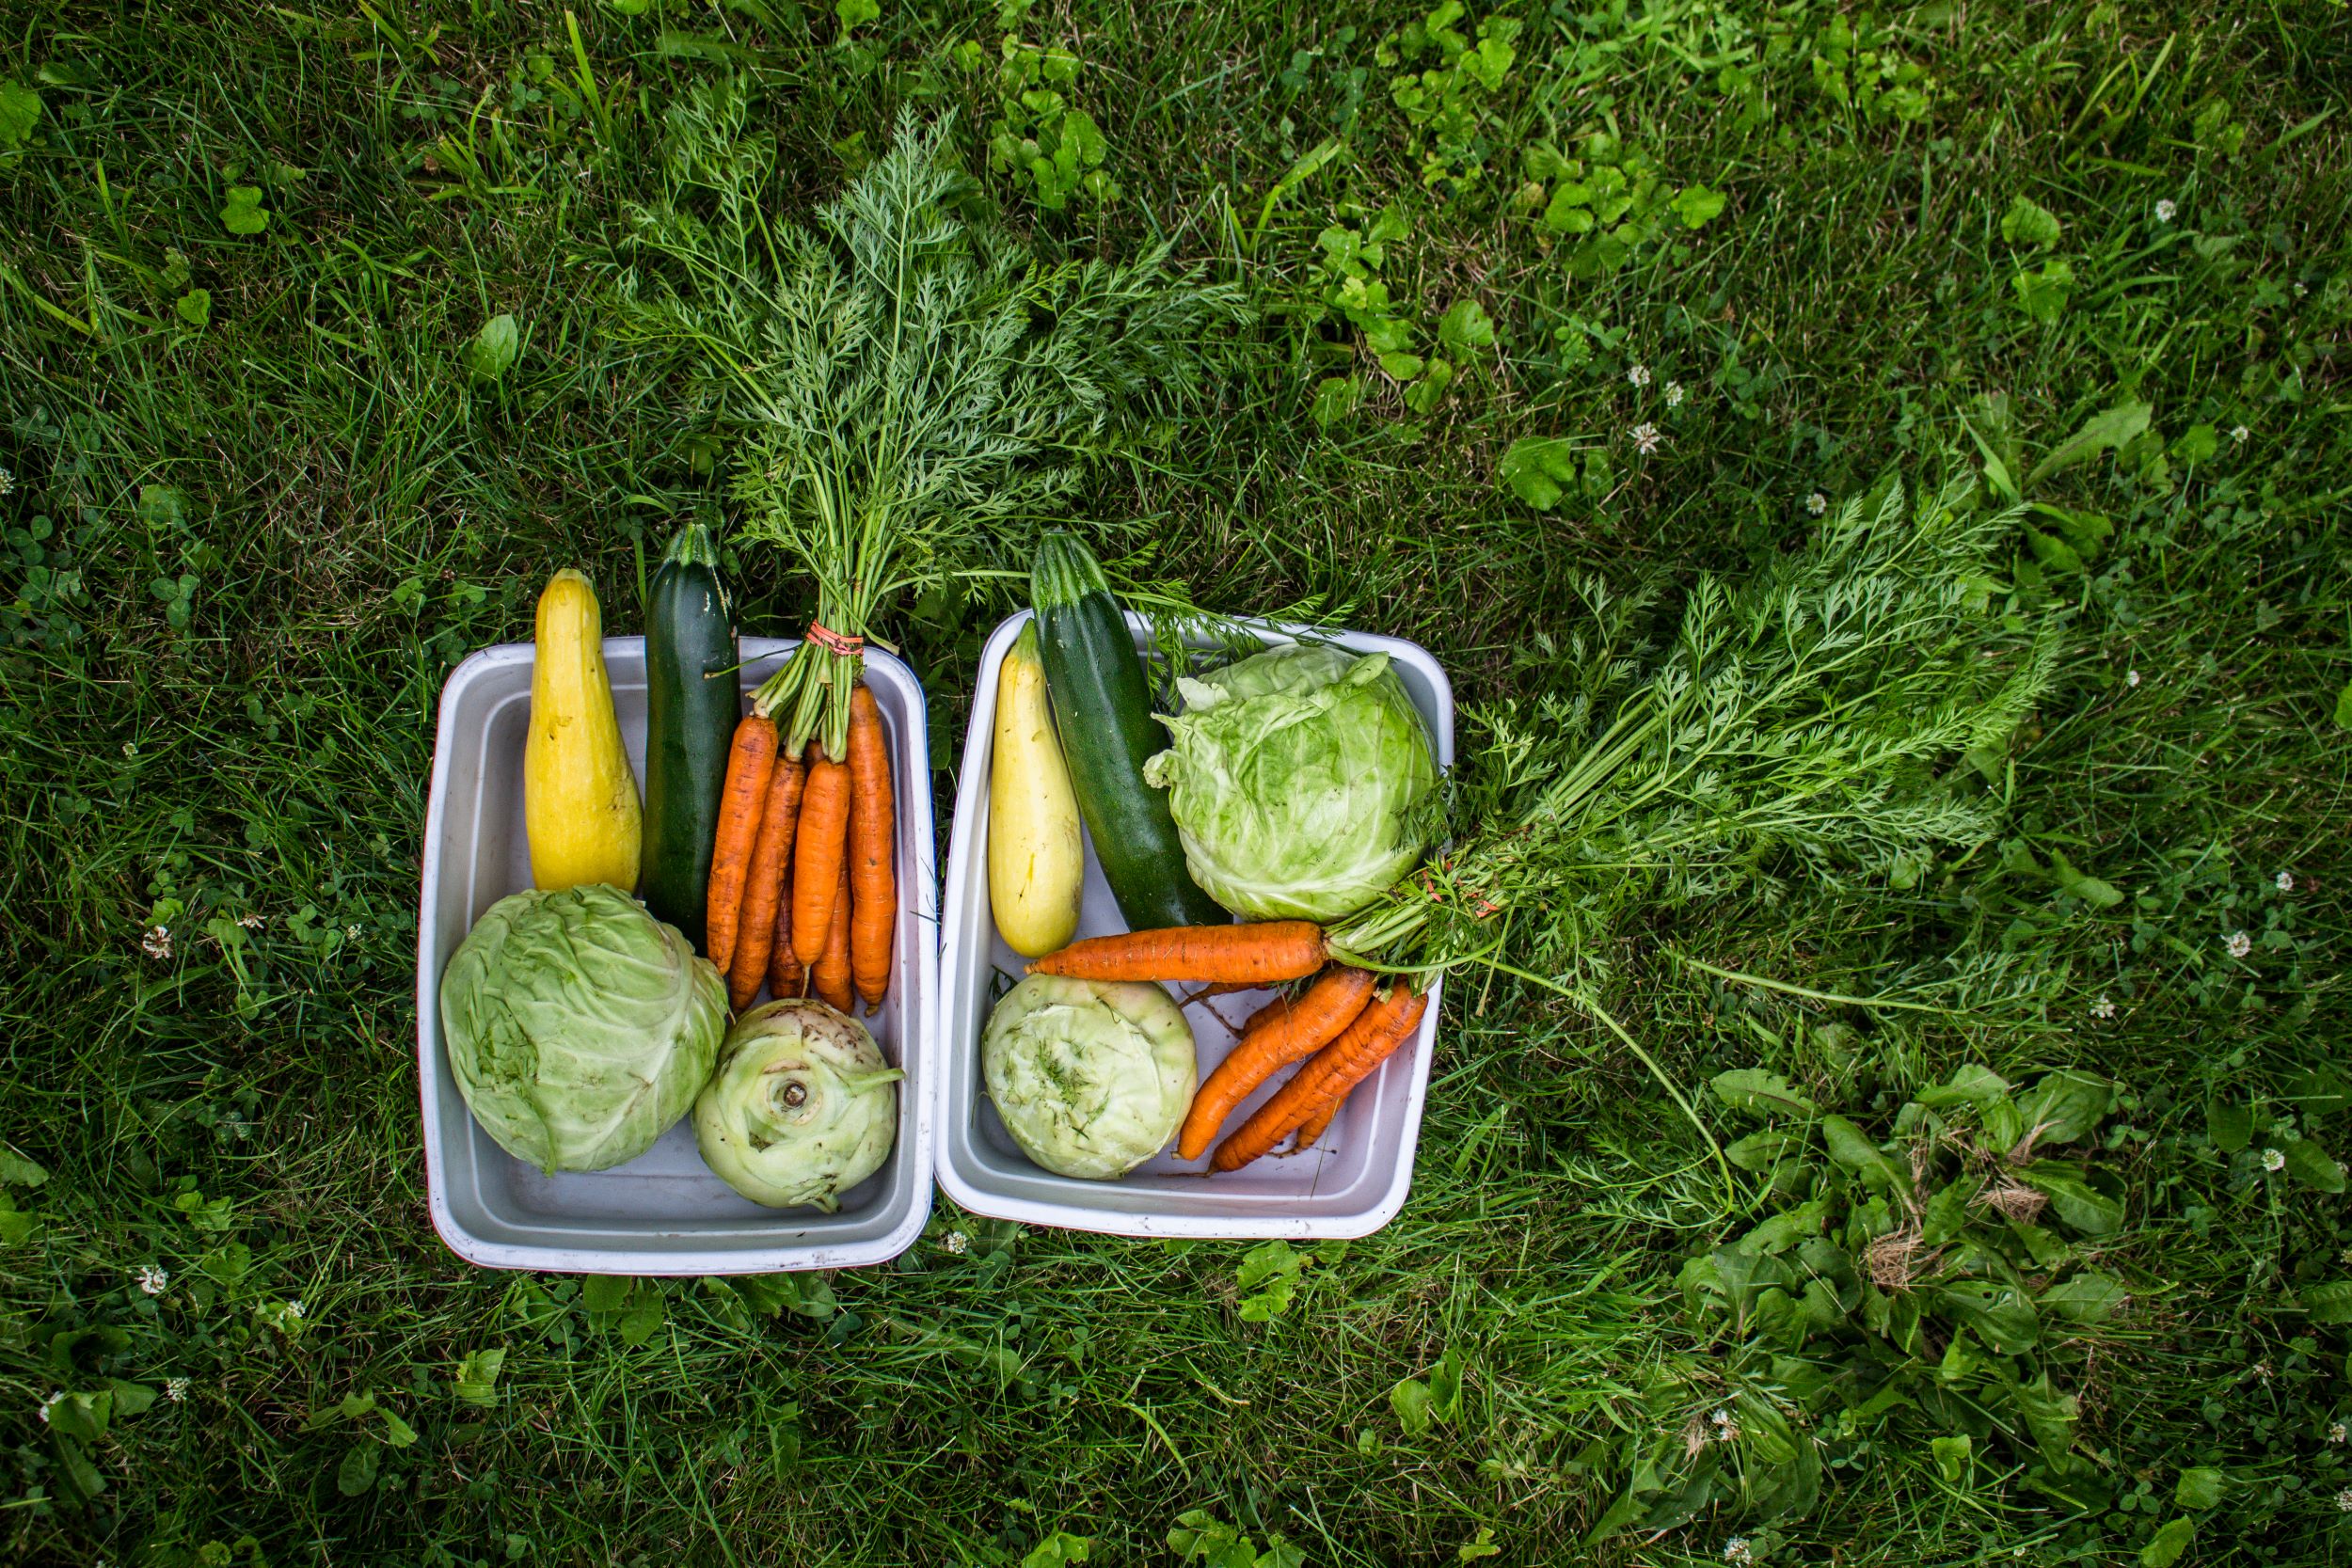 Two baskets of produce in the grass